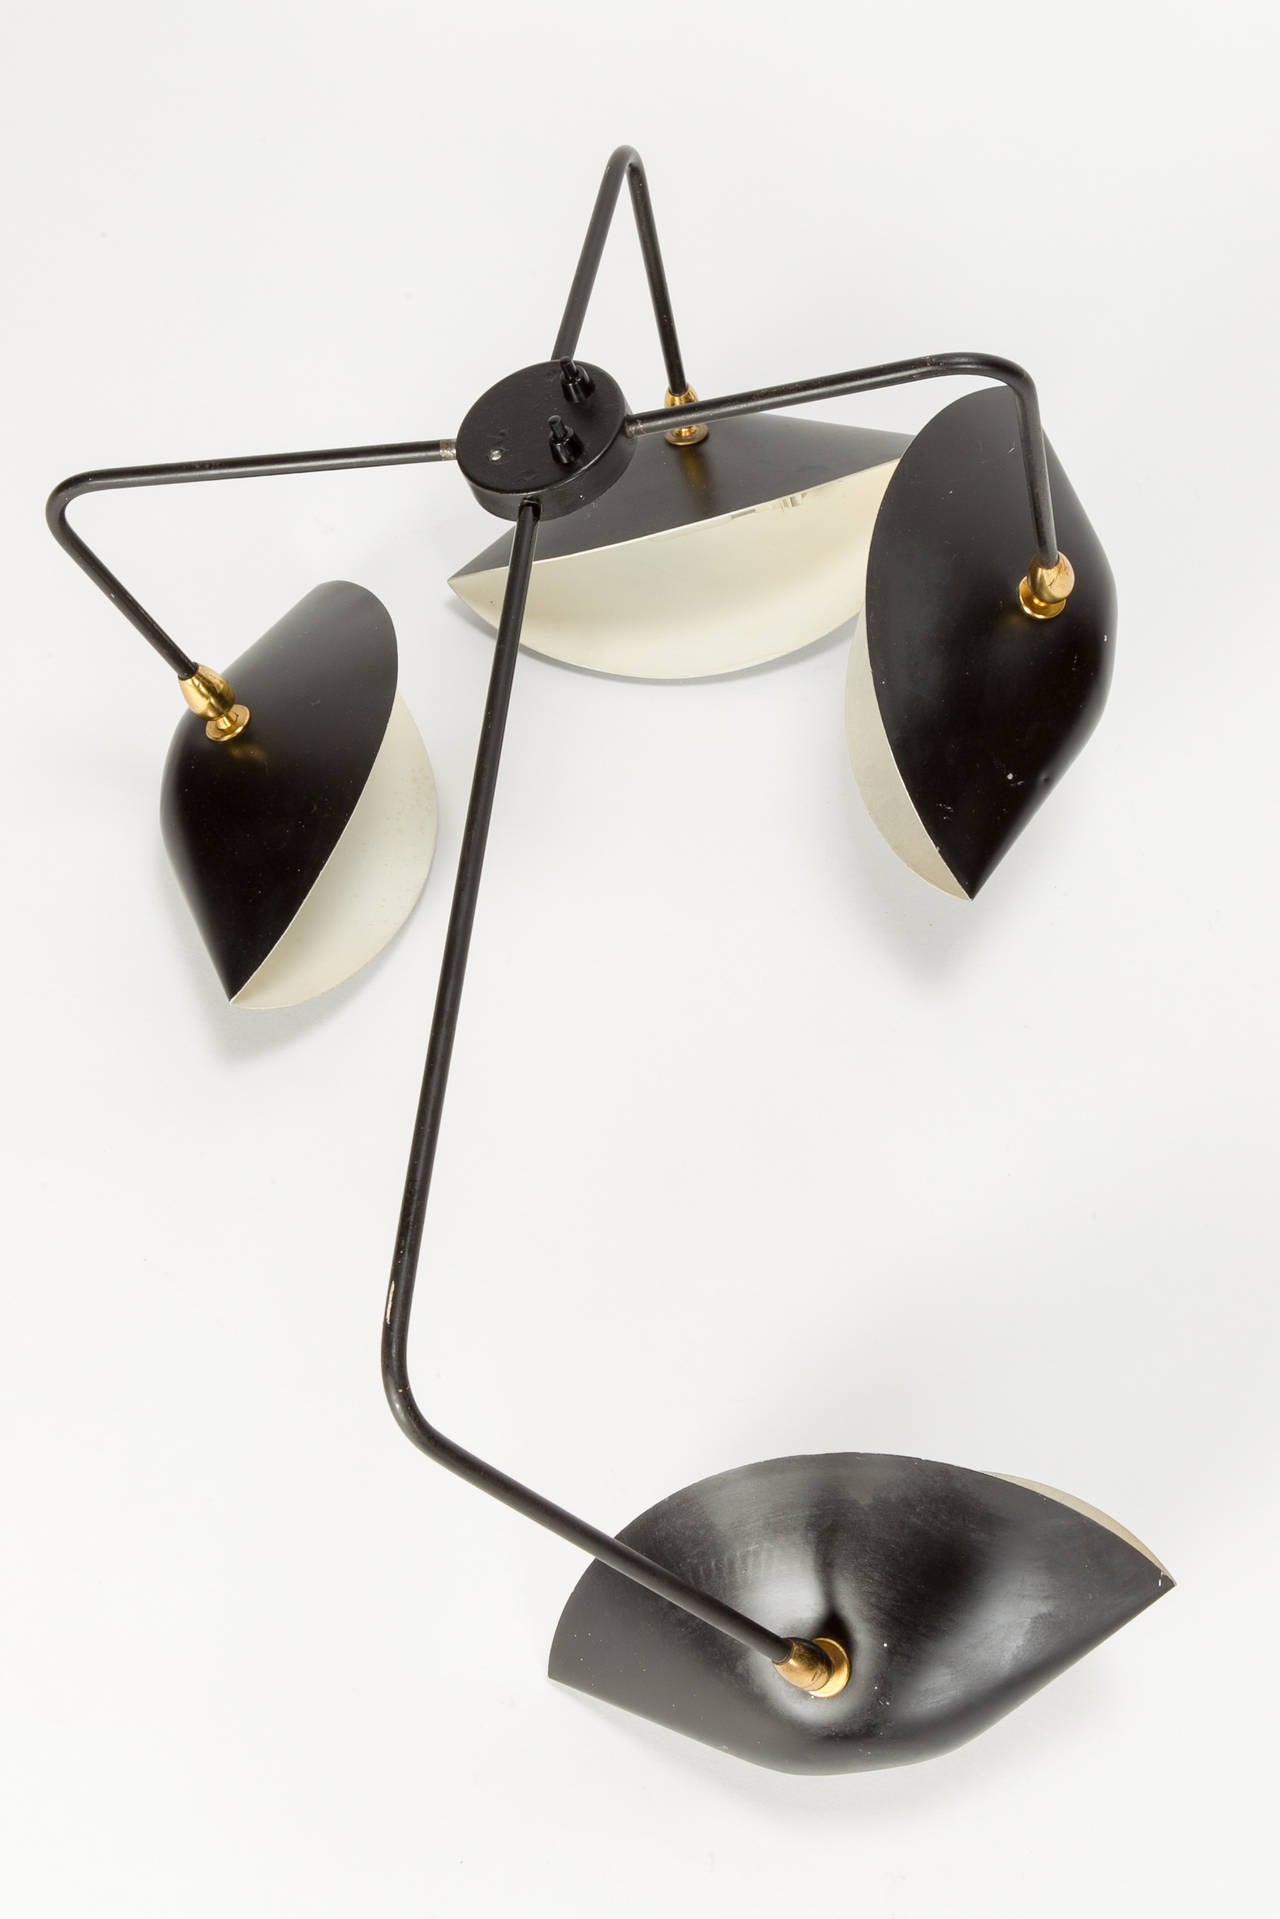 Mid-Century Modern Serge Mouille Four-Arm Wall Lamp from the 1950s